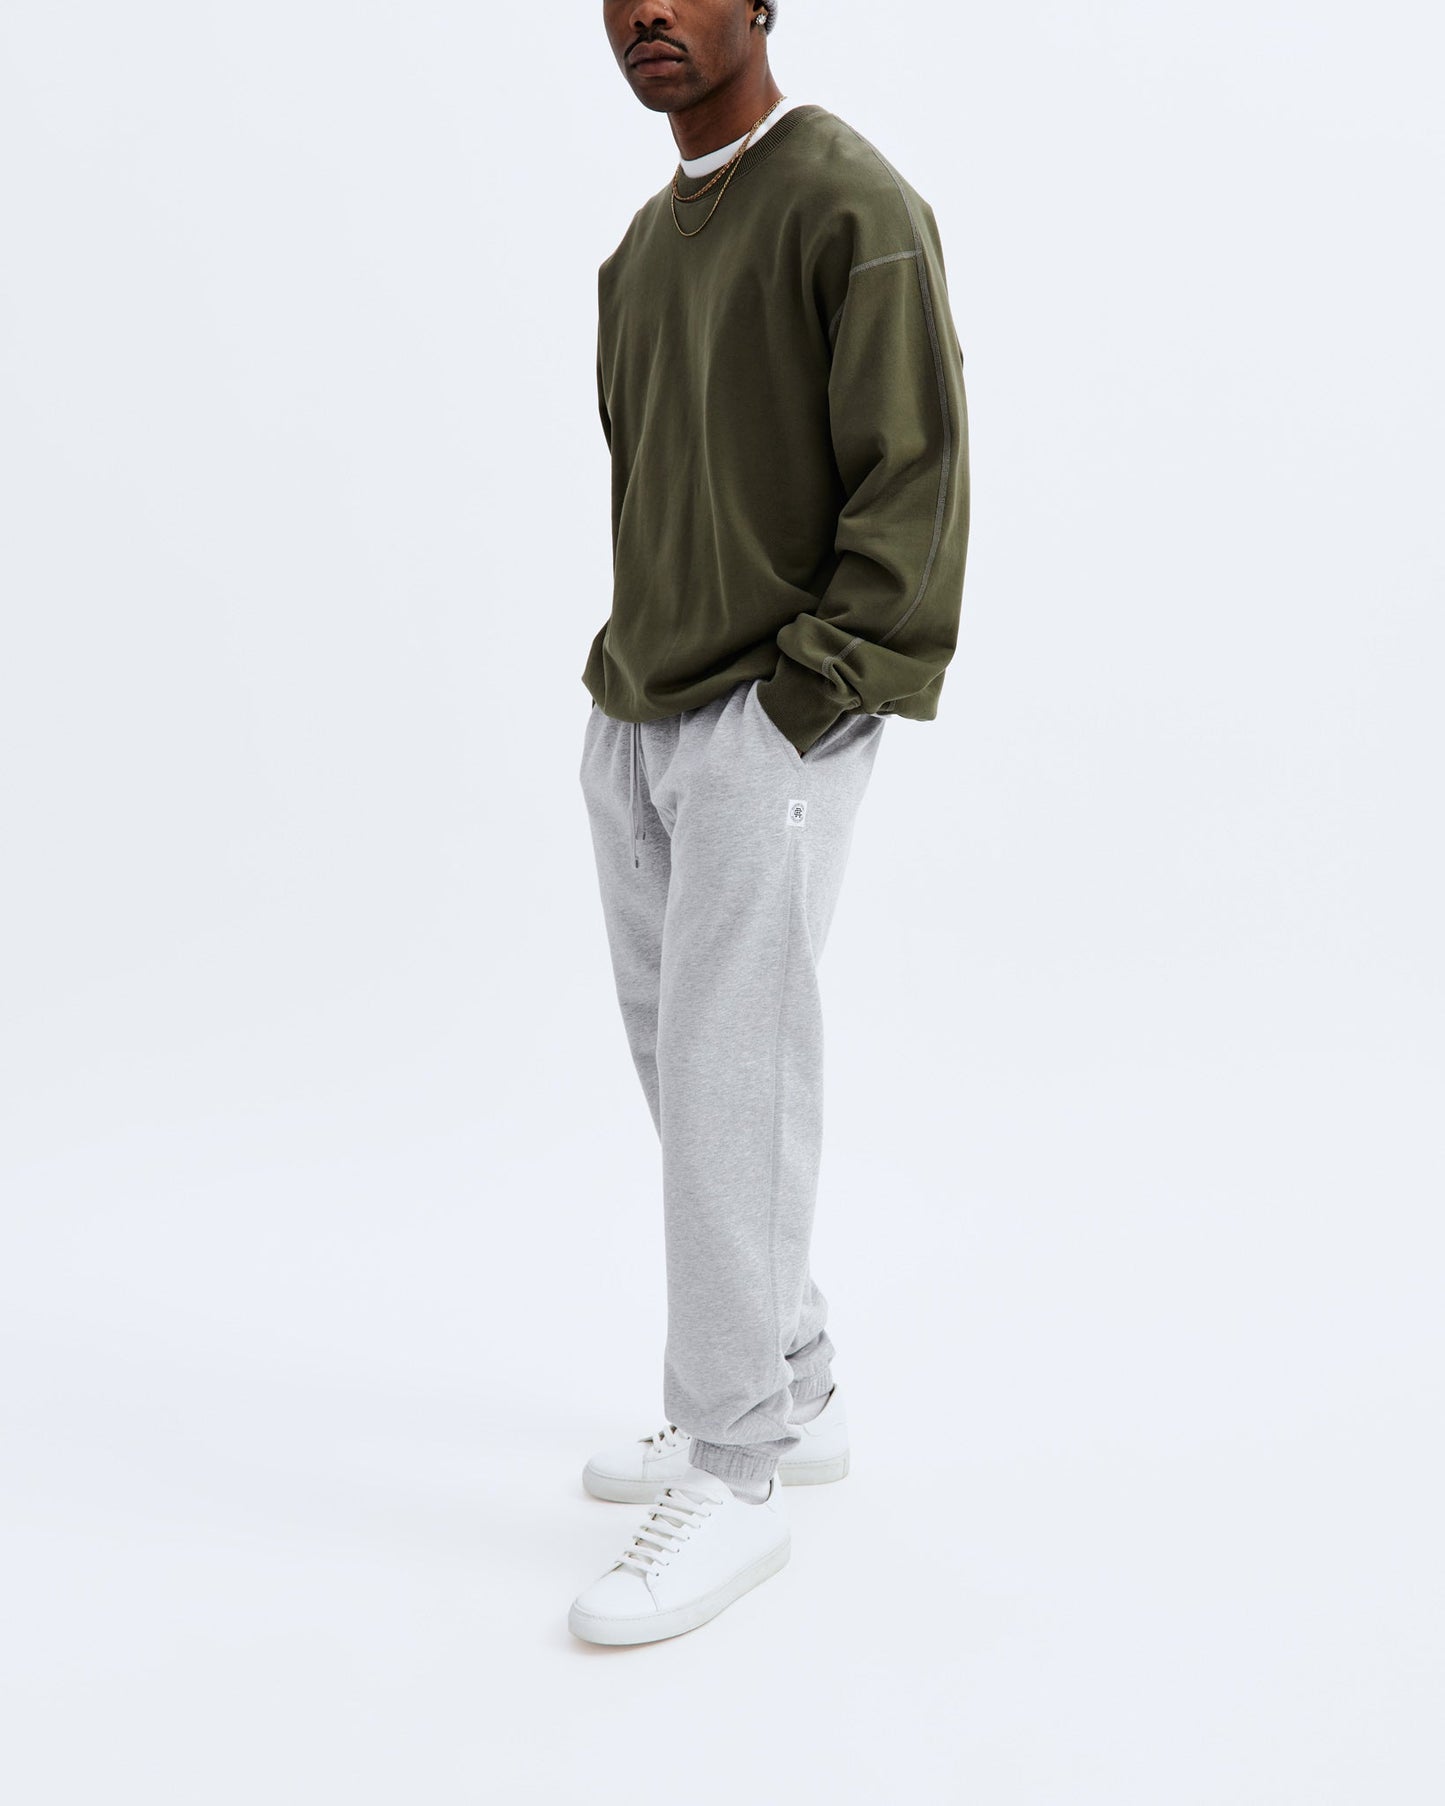 Reigning Champ - Midweight Terry Cuffed Sweatpant in Heather Grey –  gravitypope